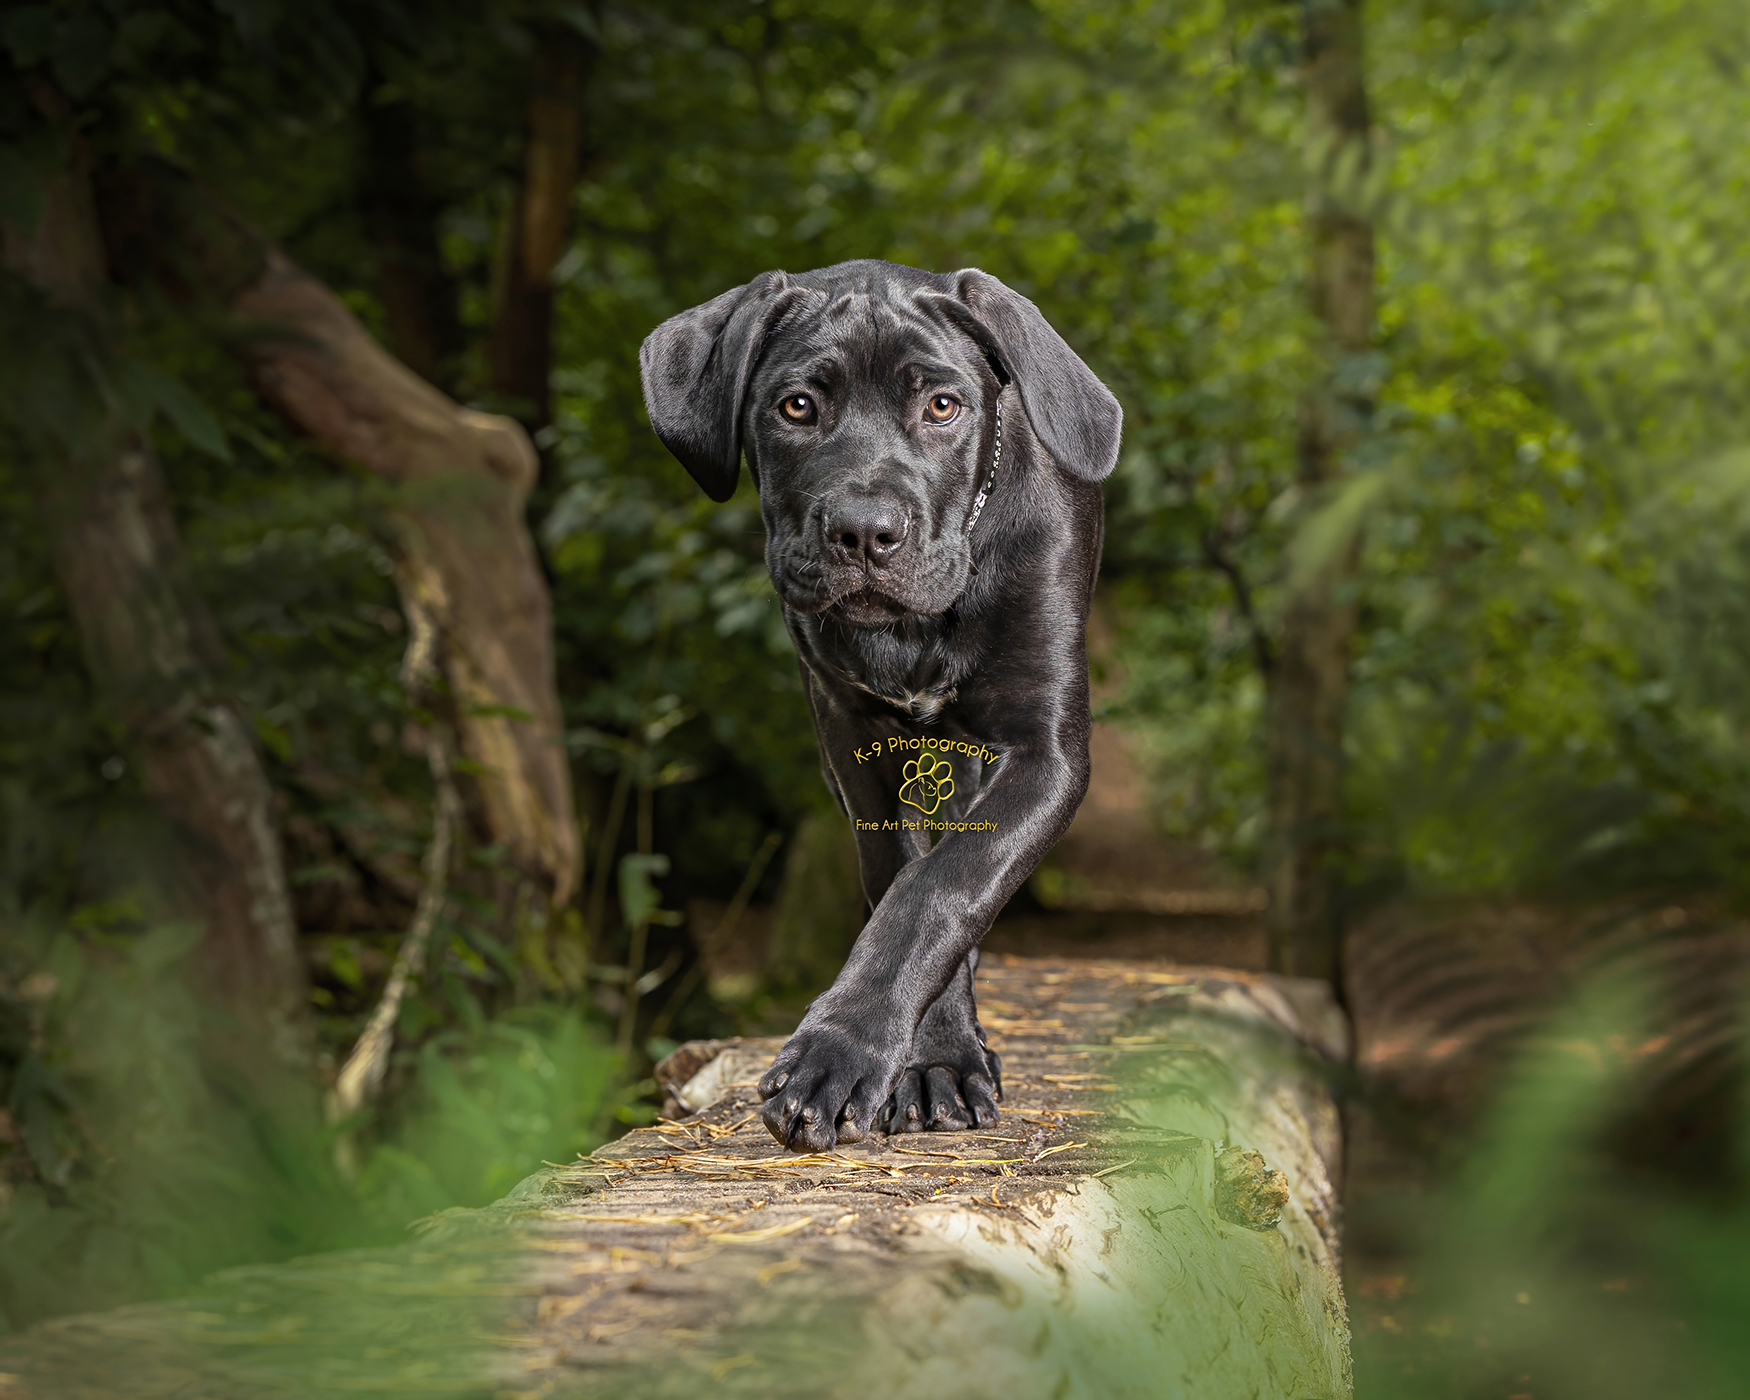 dog photography by Adrian Bullers taken outdoors featuring Coco the Cane Corsa puppy